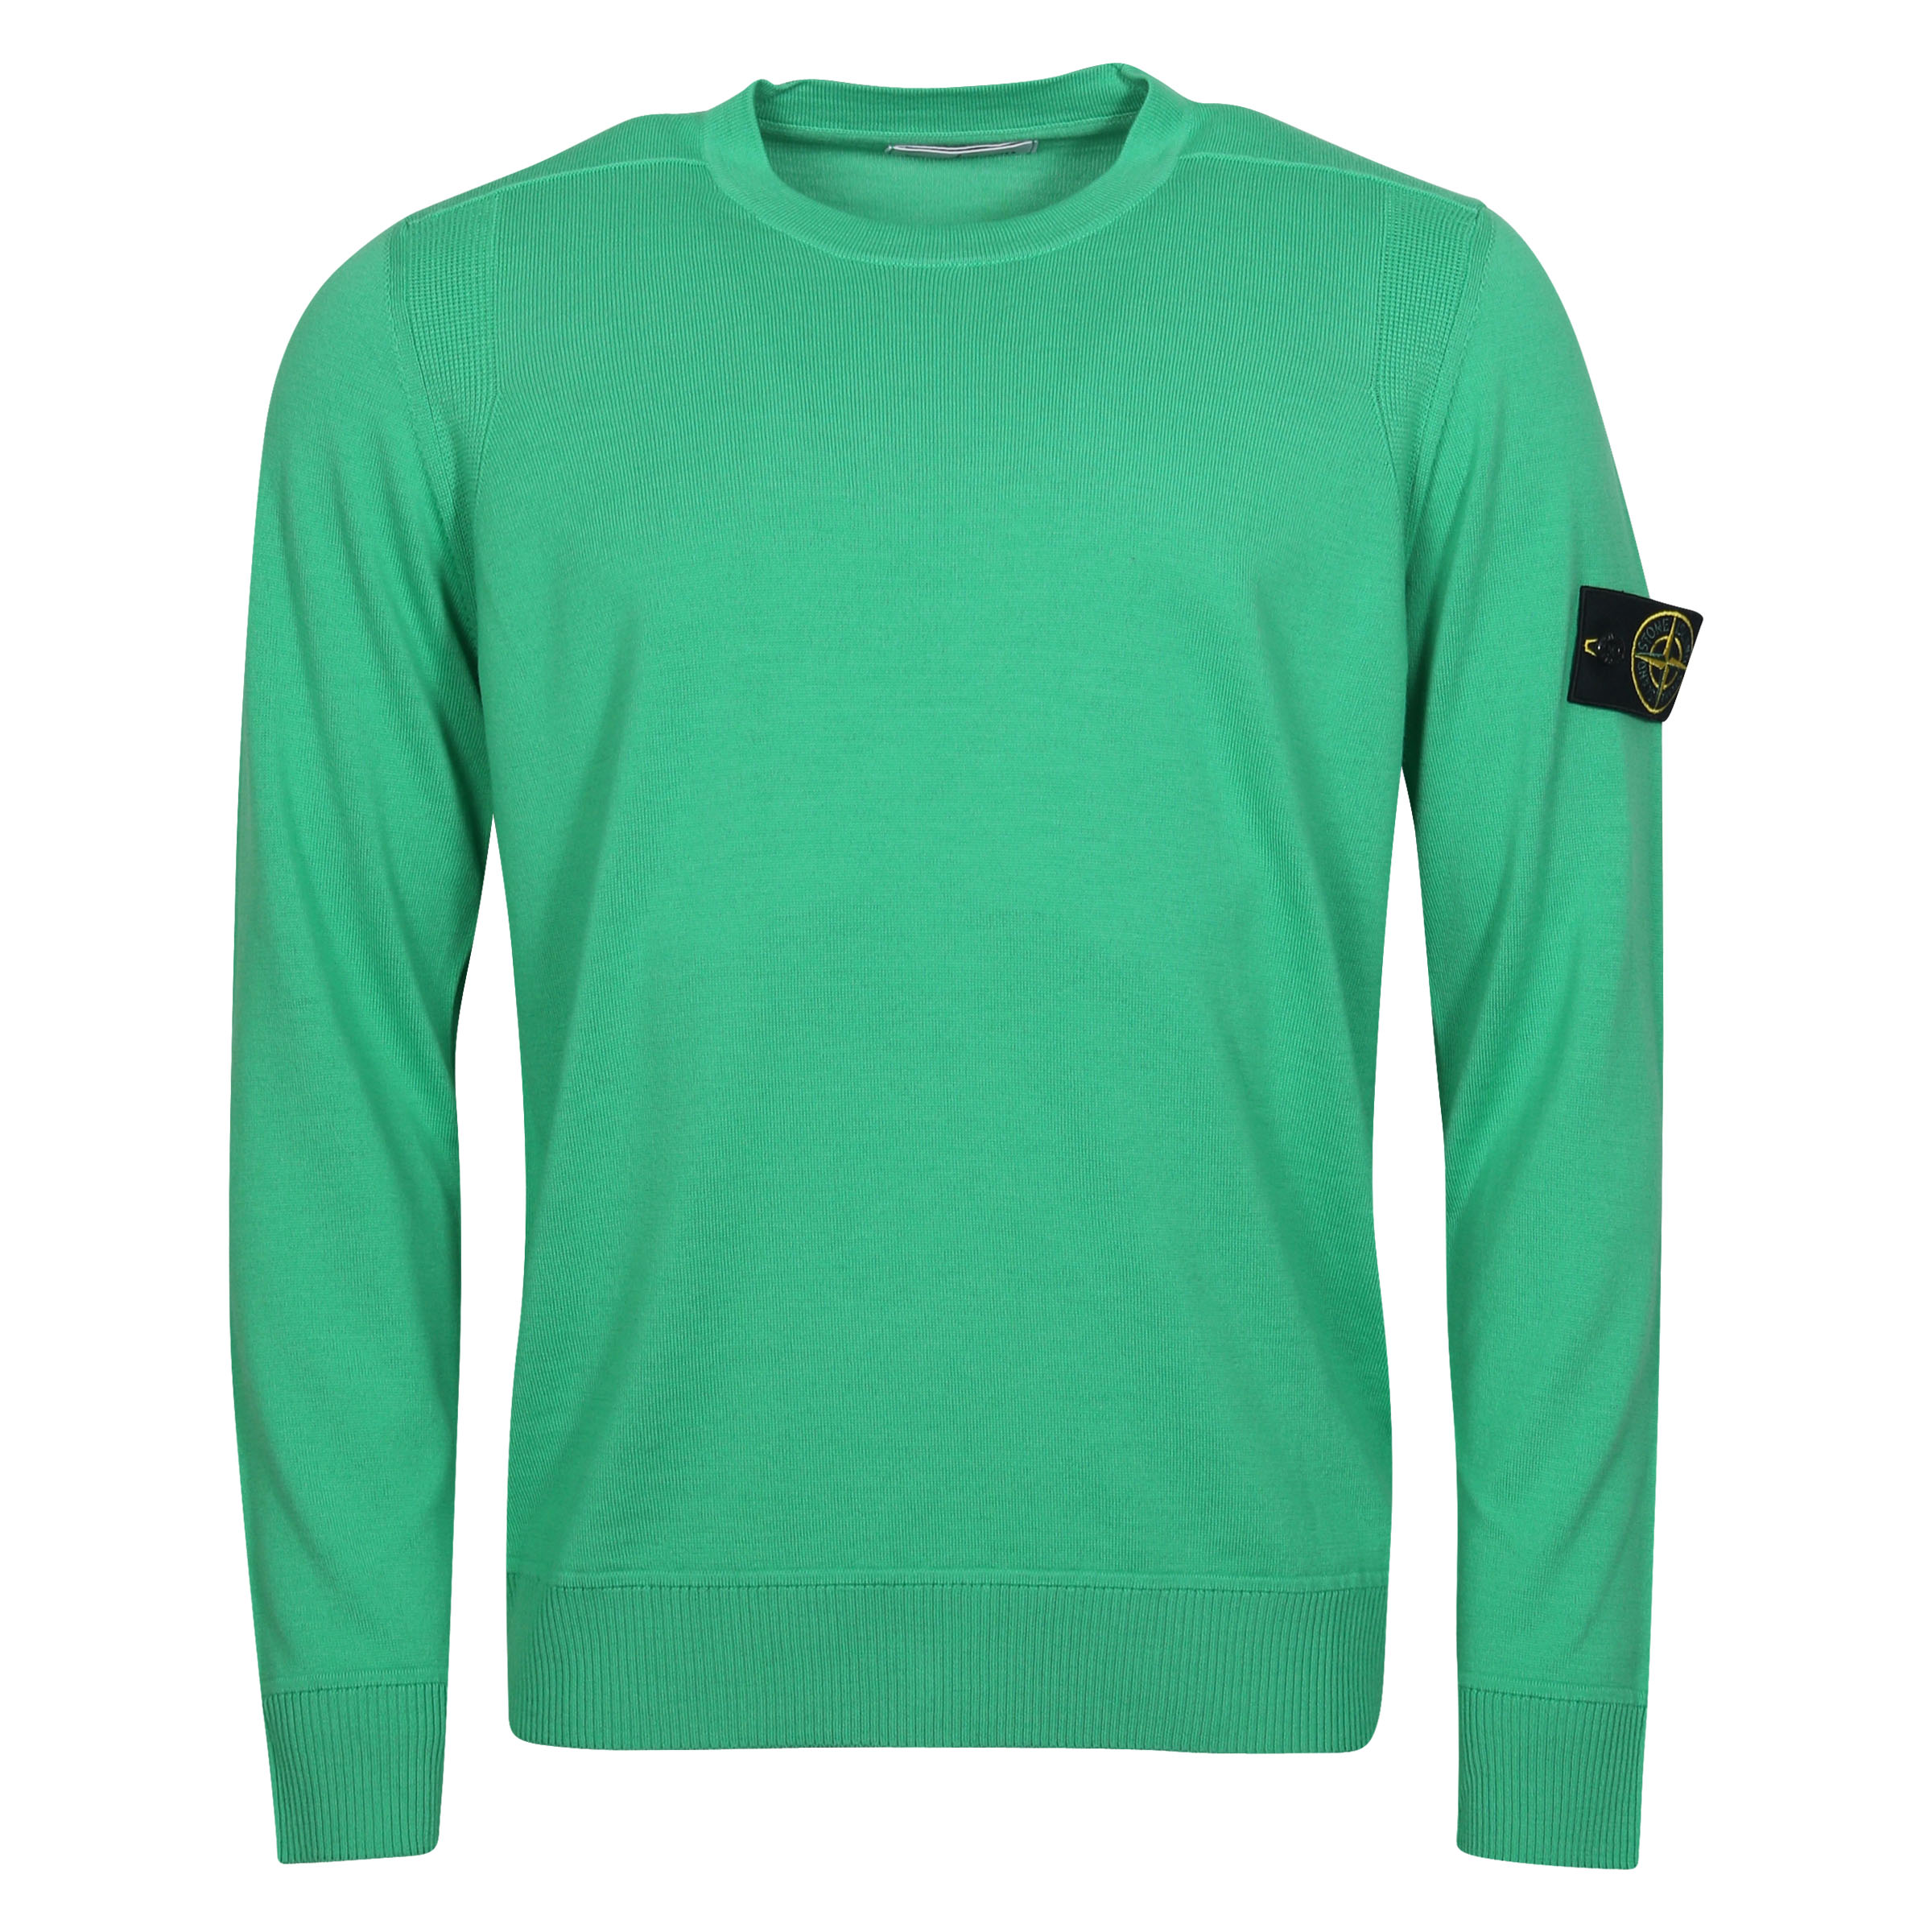 Stone Island Crew Neck Knit Sweater in Green S